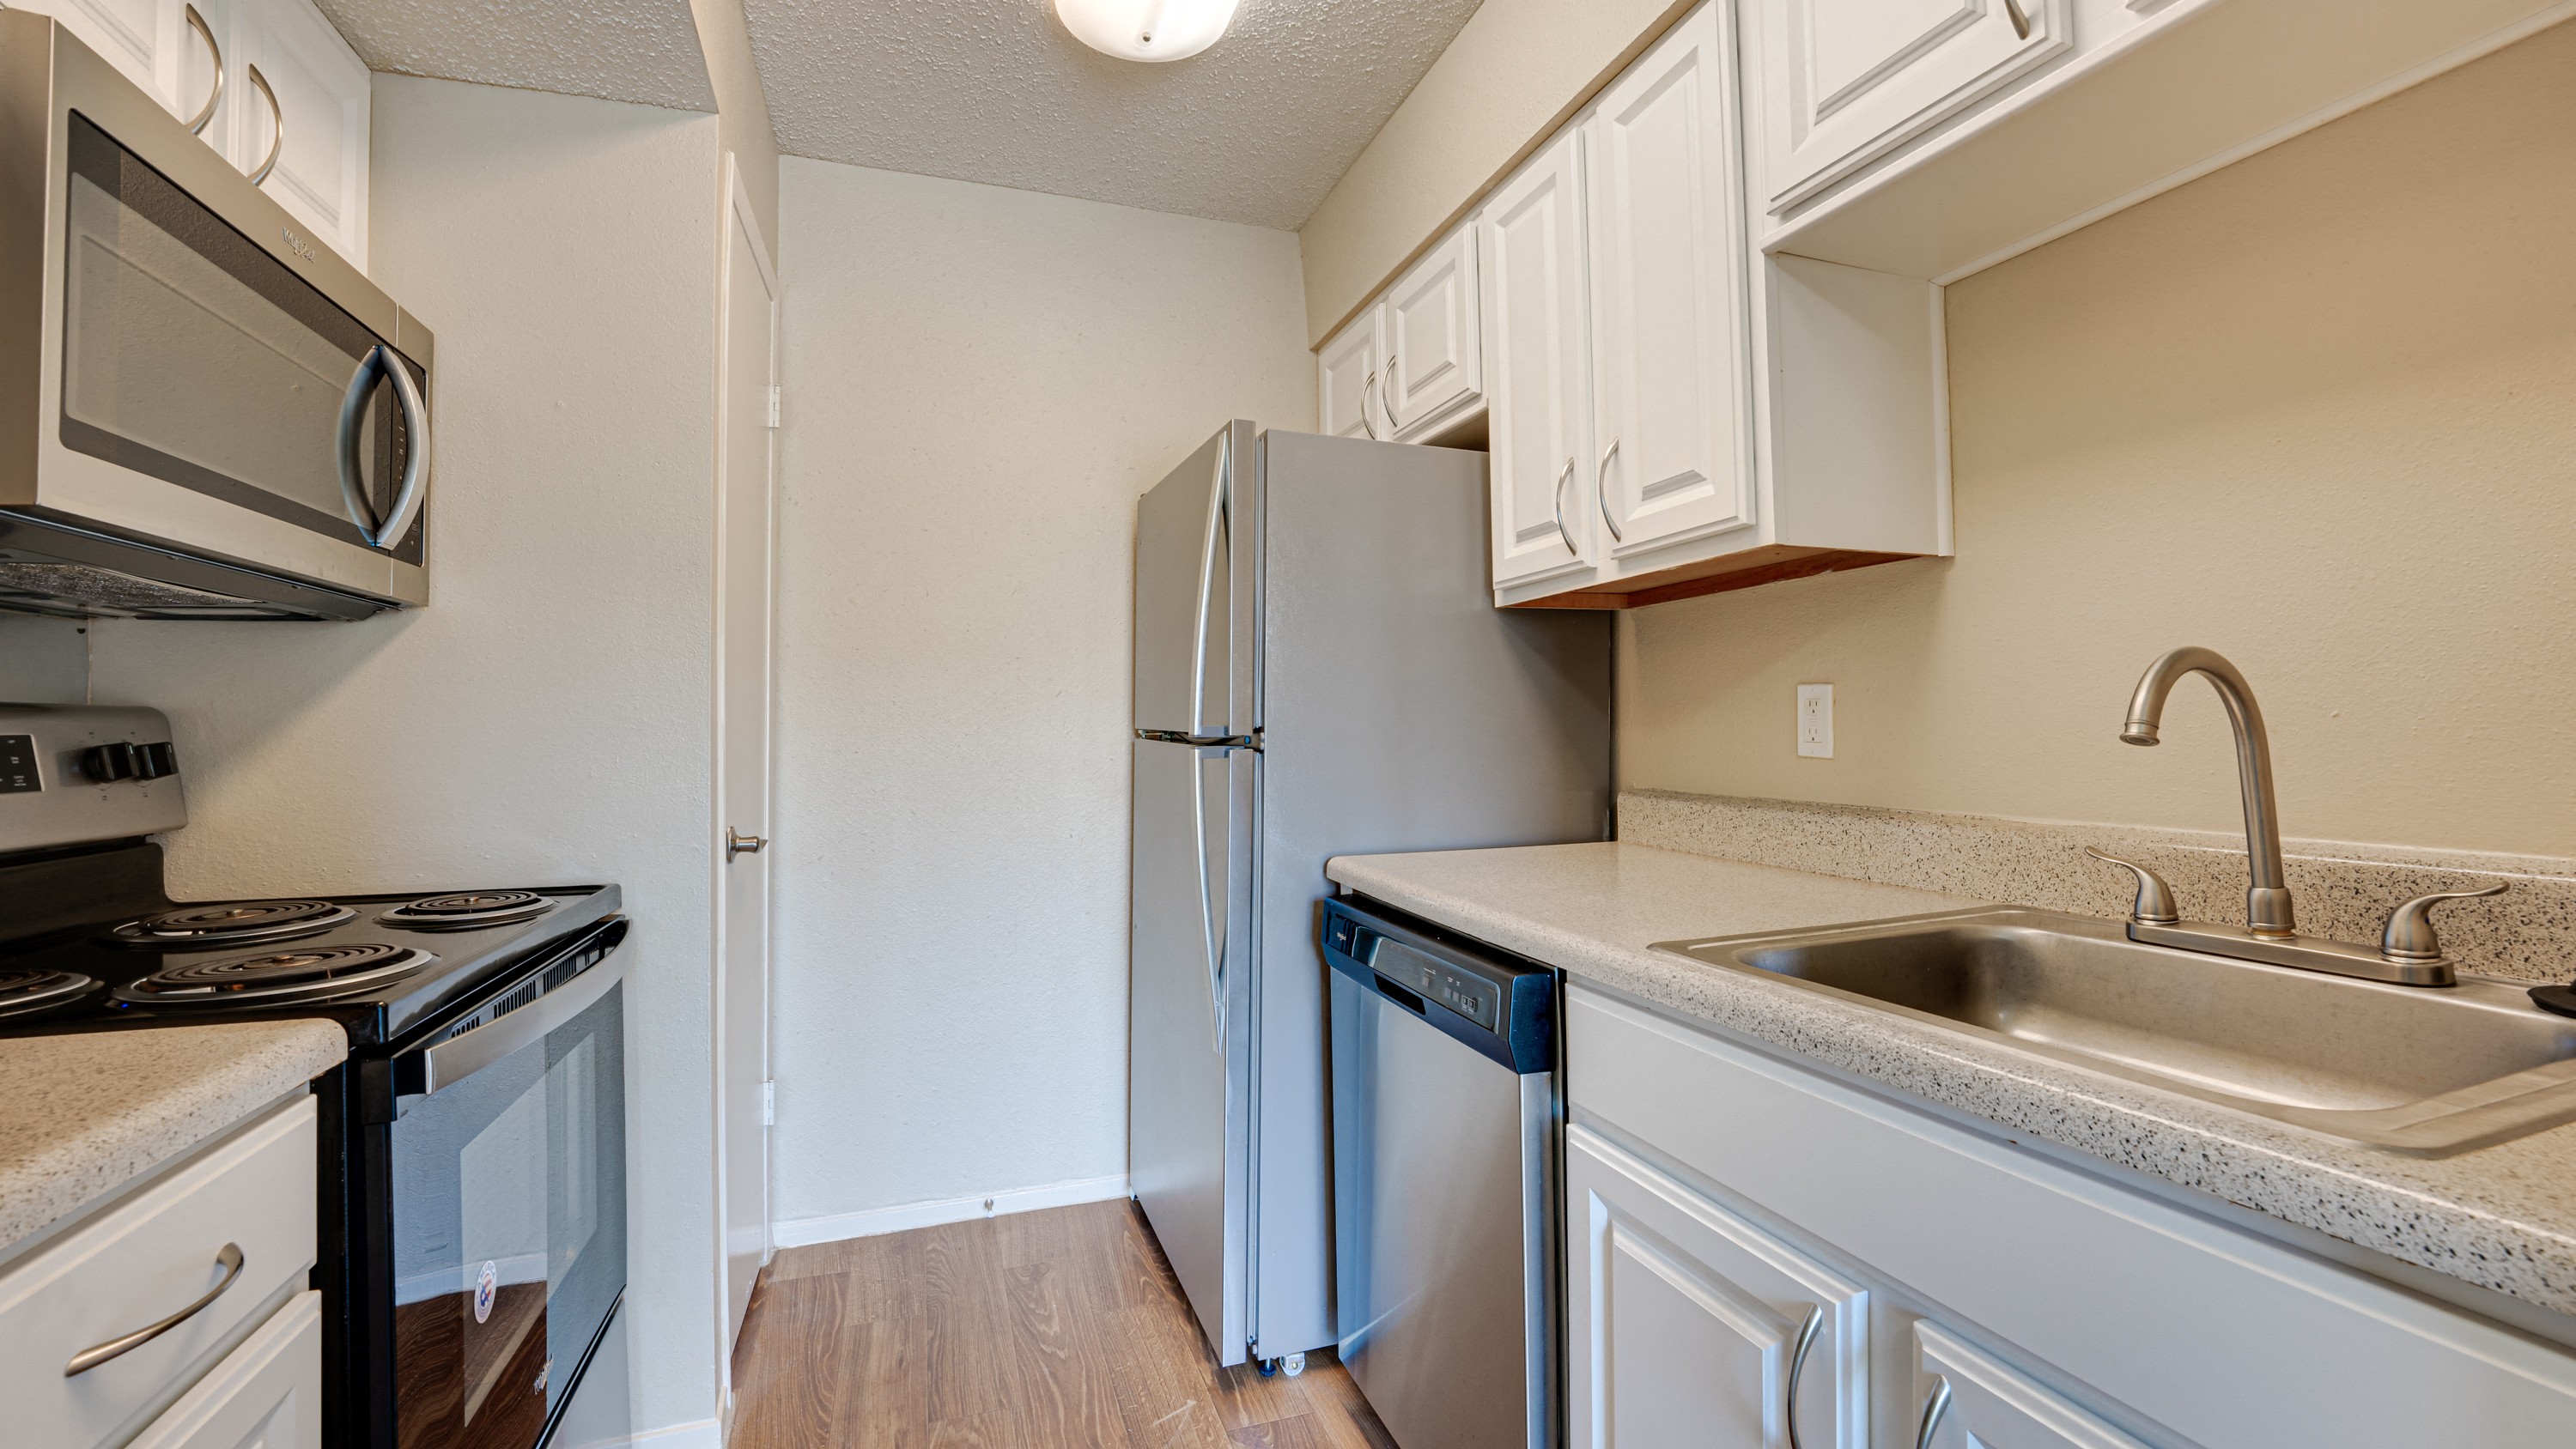 Fully Equipped Kitchen at Copper Hill, Texas, 76021